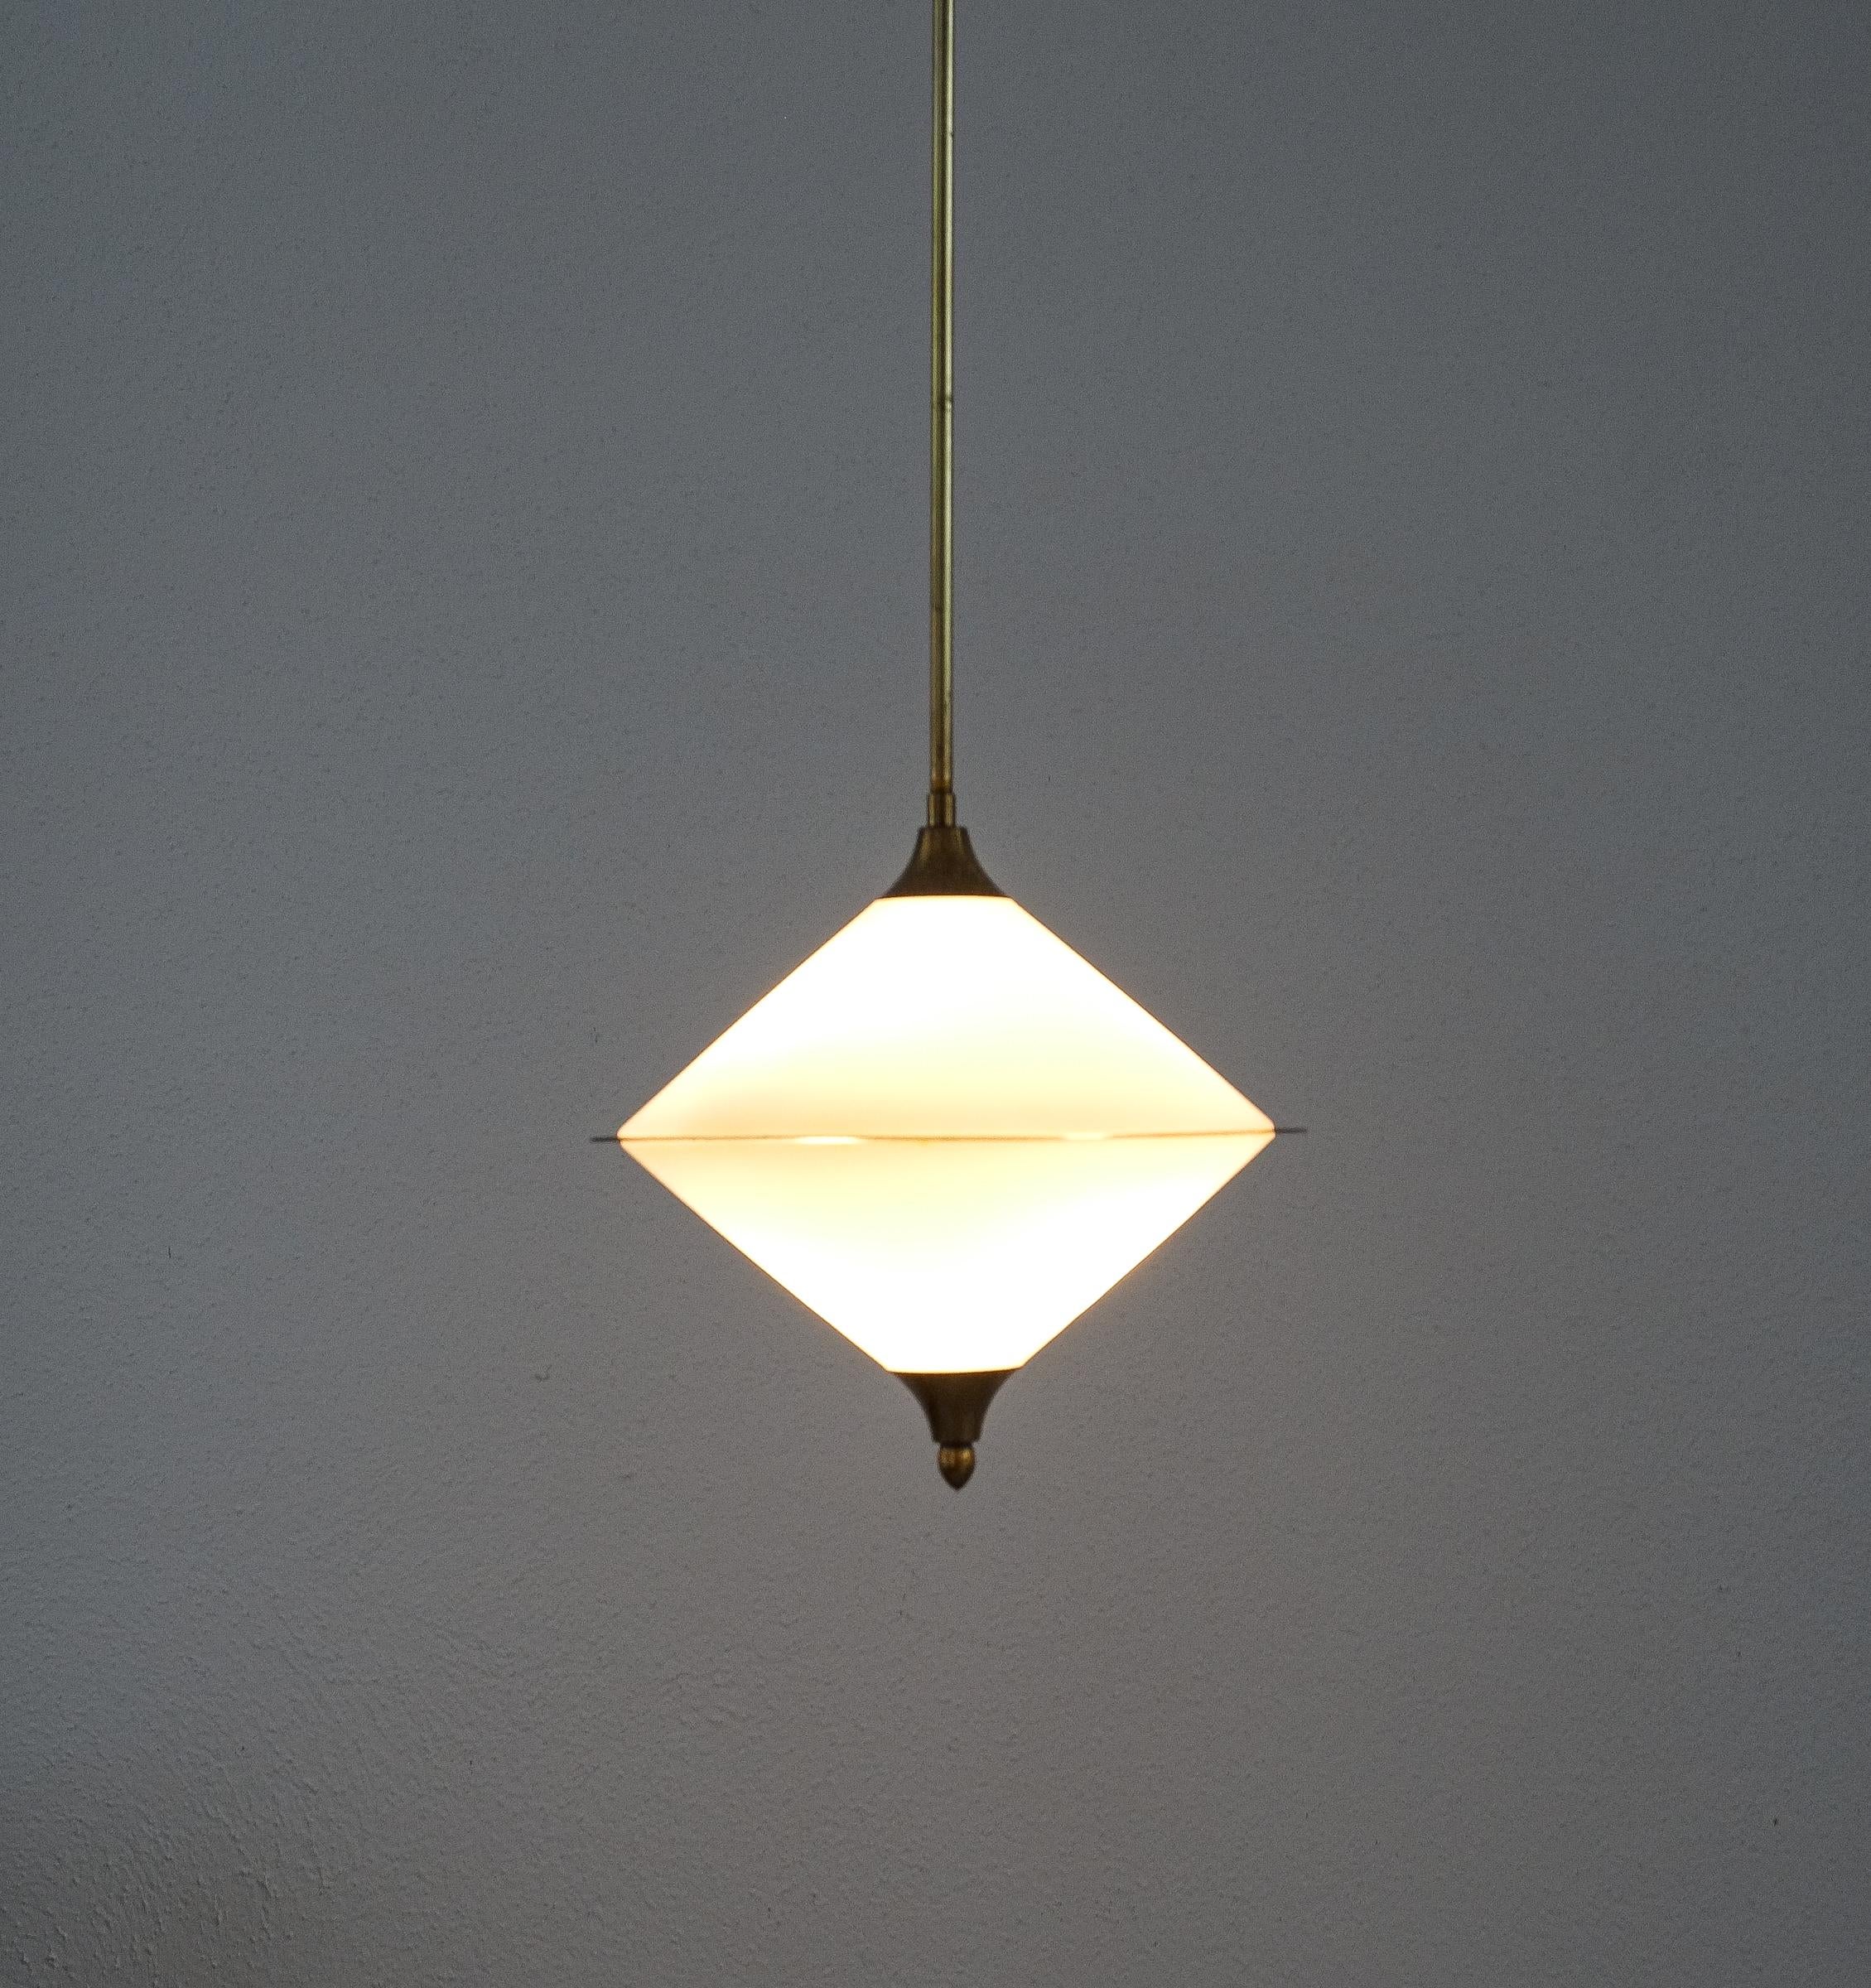 Rare Spin Top Shaped Pendant Lamp Opal Glass Attributed to Lelli, circa 1950 For Sale 1